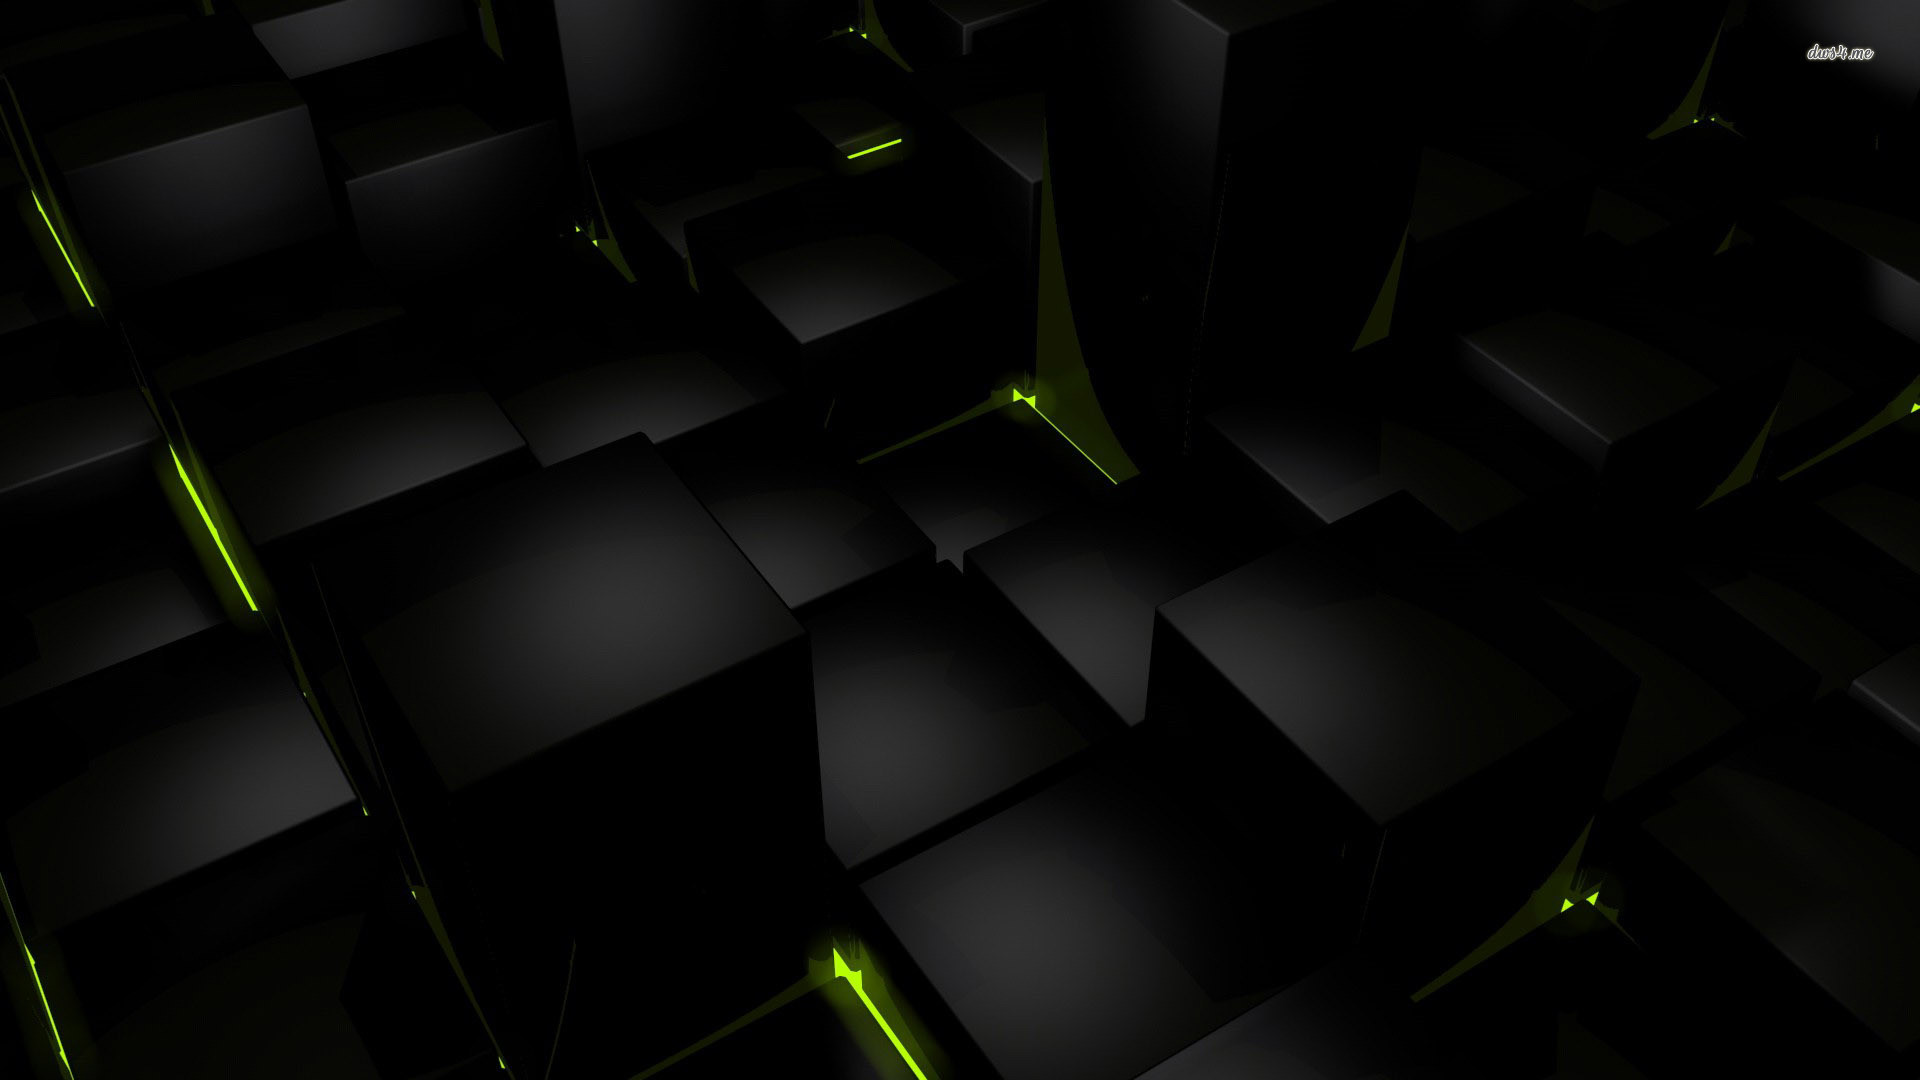 1920x1080 Green And Black Images 5 Wide Wallpaper